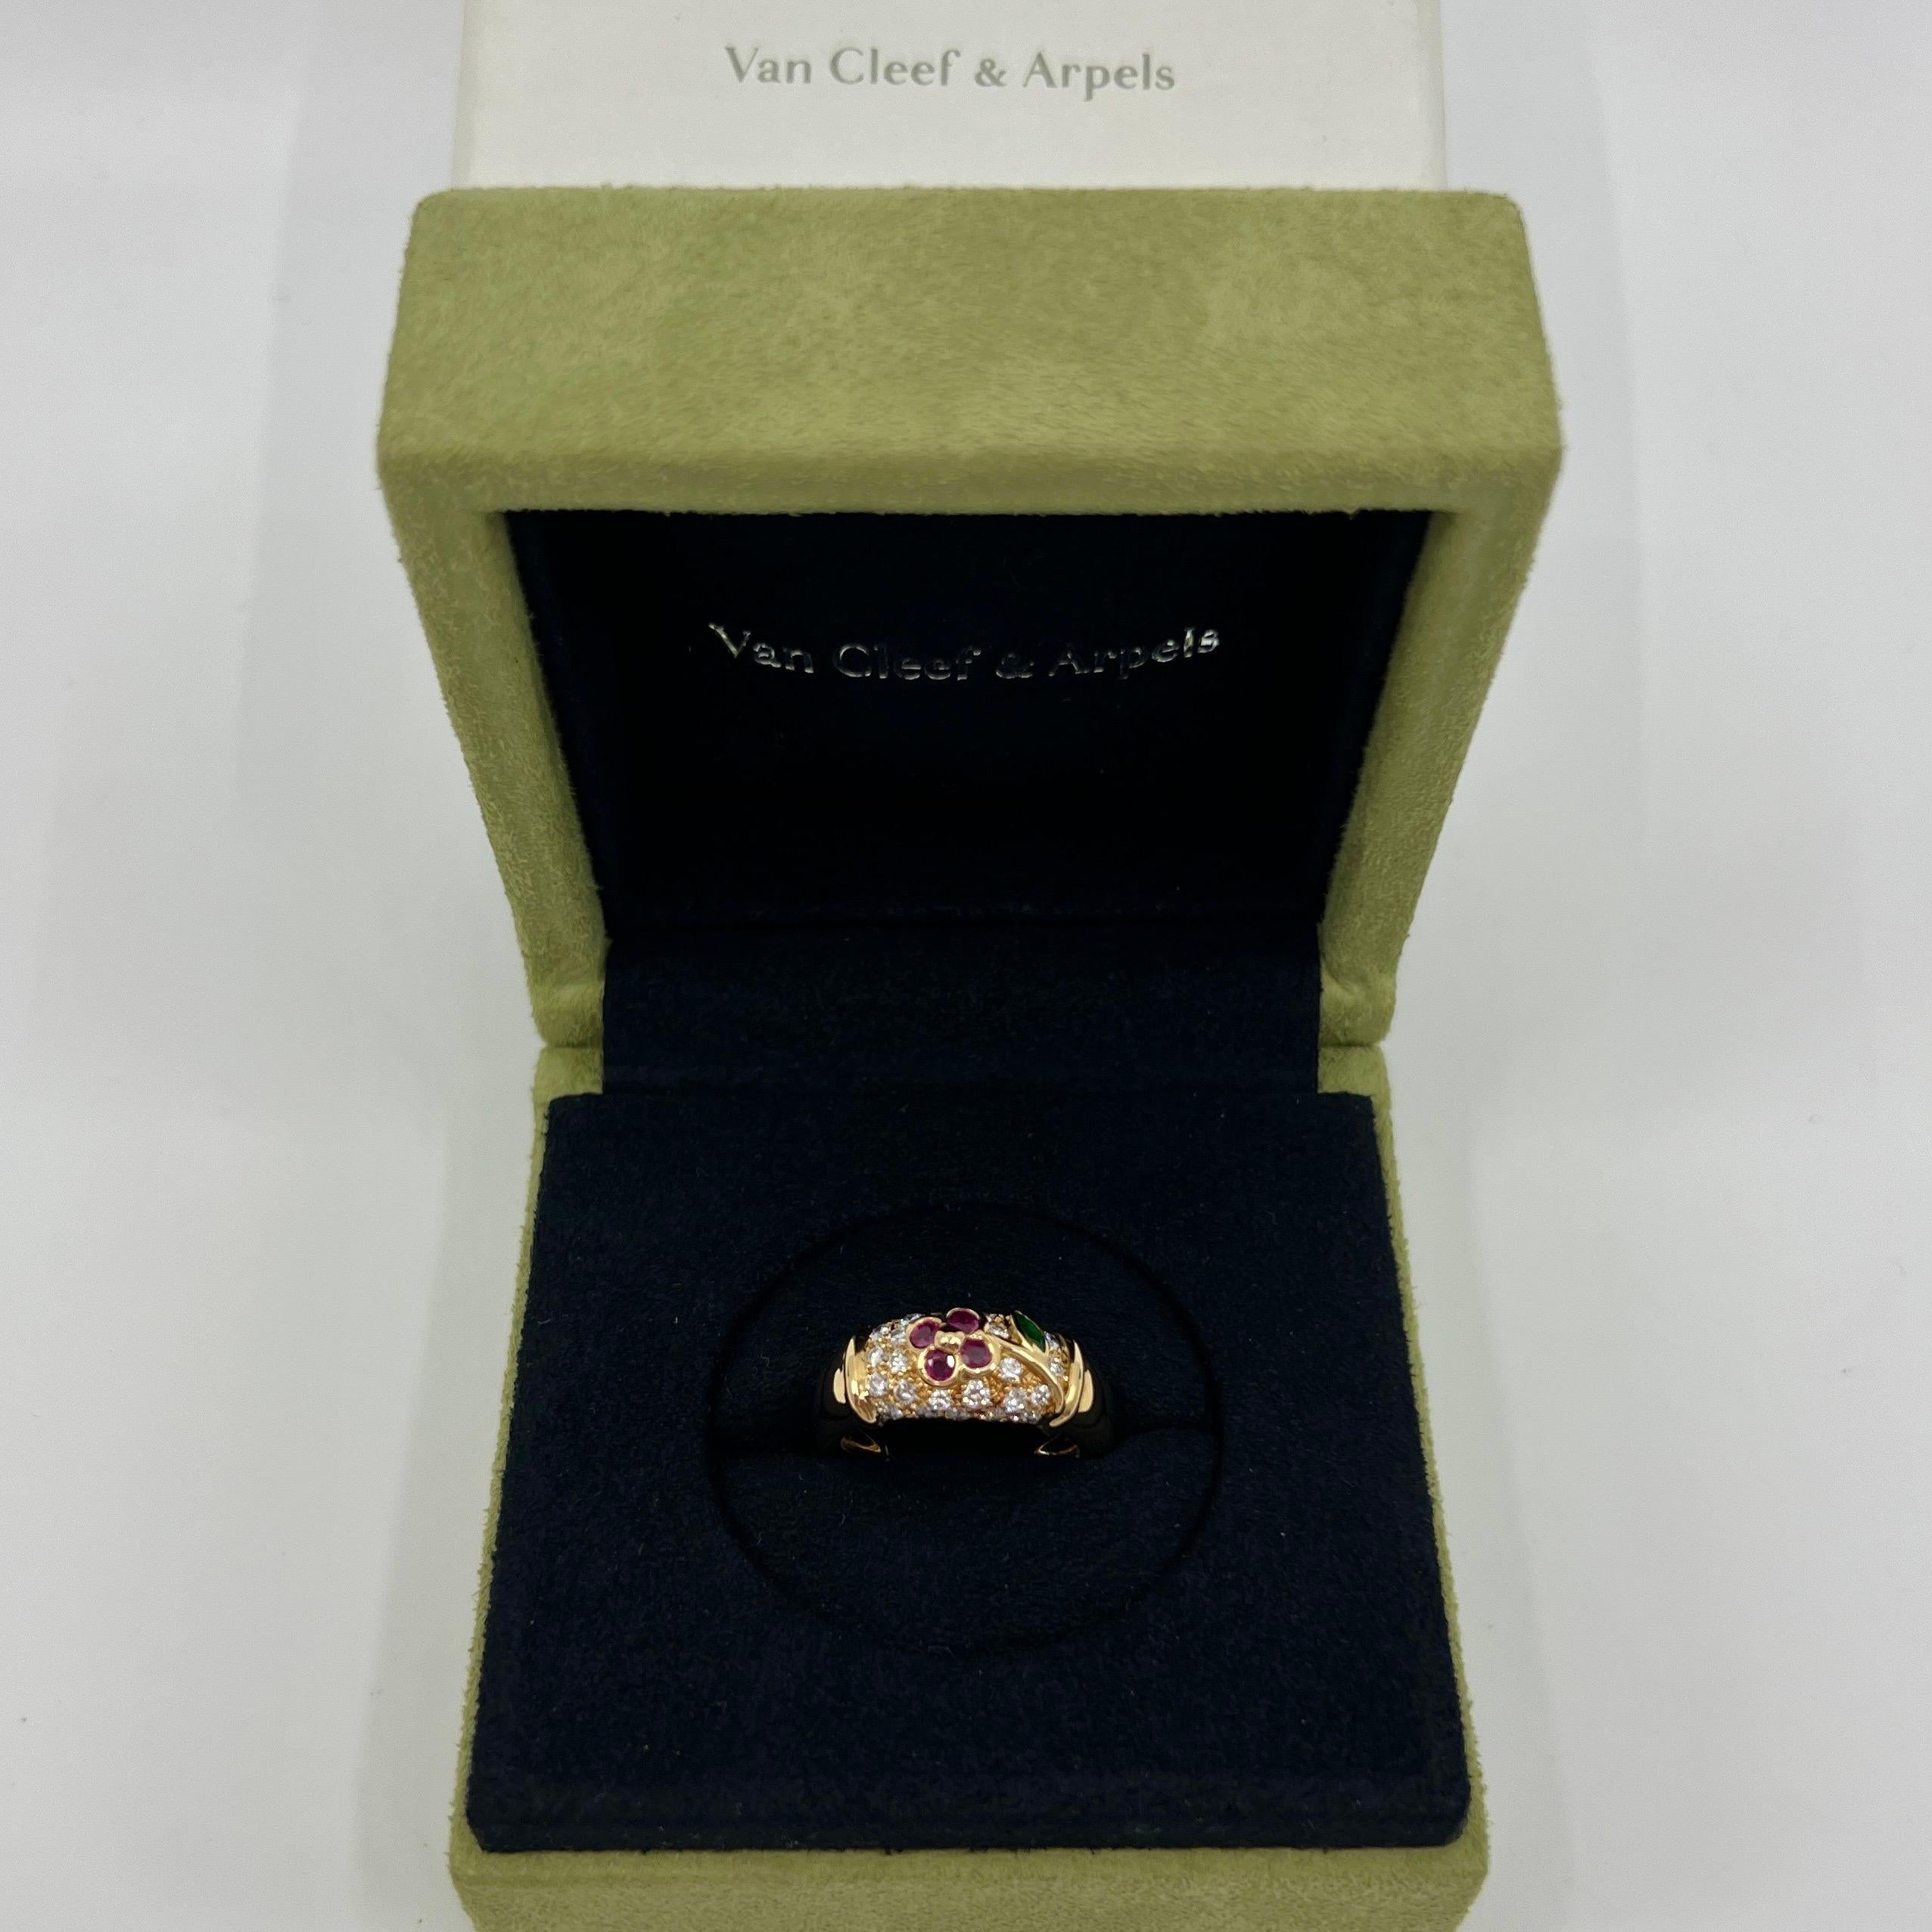 Rare Van Cleef & Arpels Ruby Emerald Diamond 18k Yellow Gold Floral Flower Ring For Sale 7